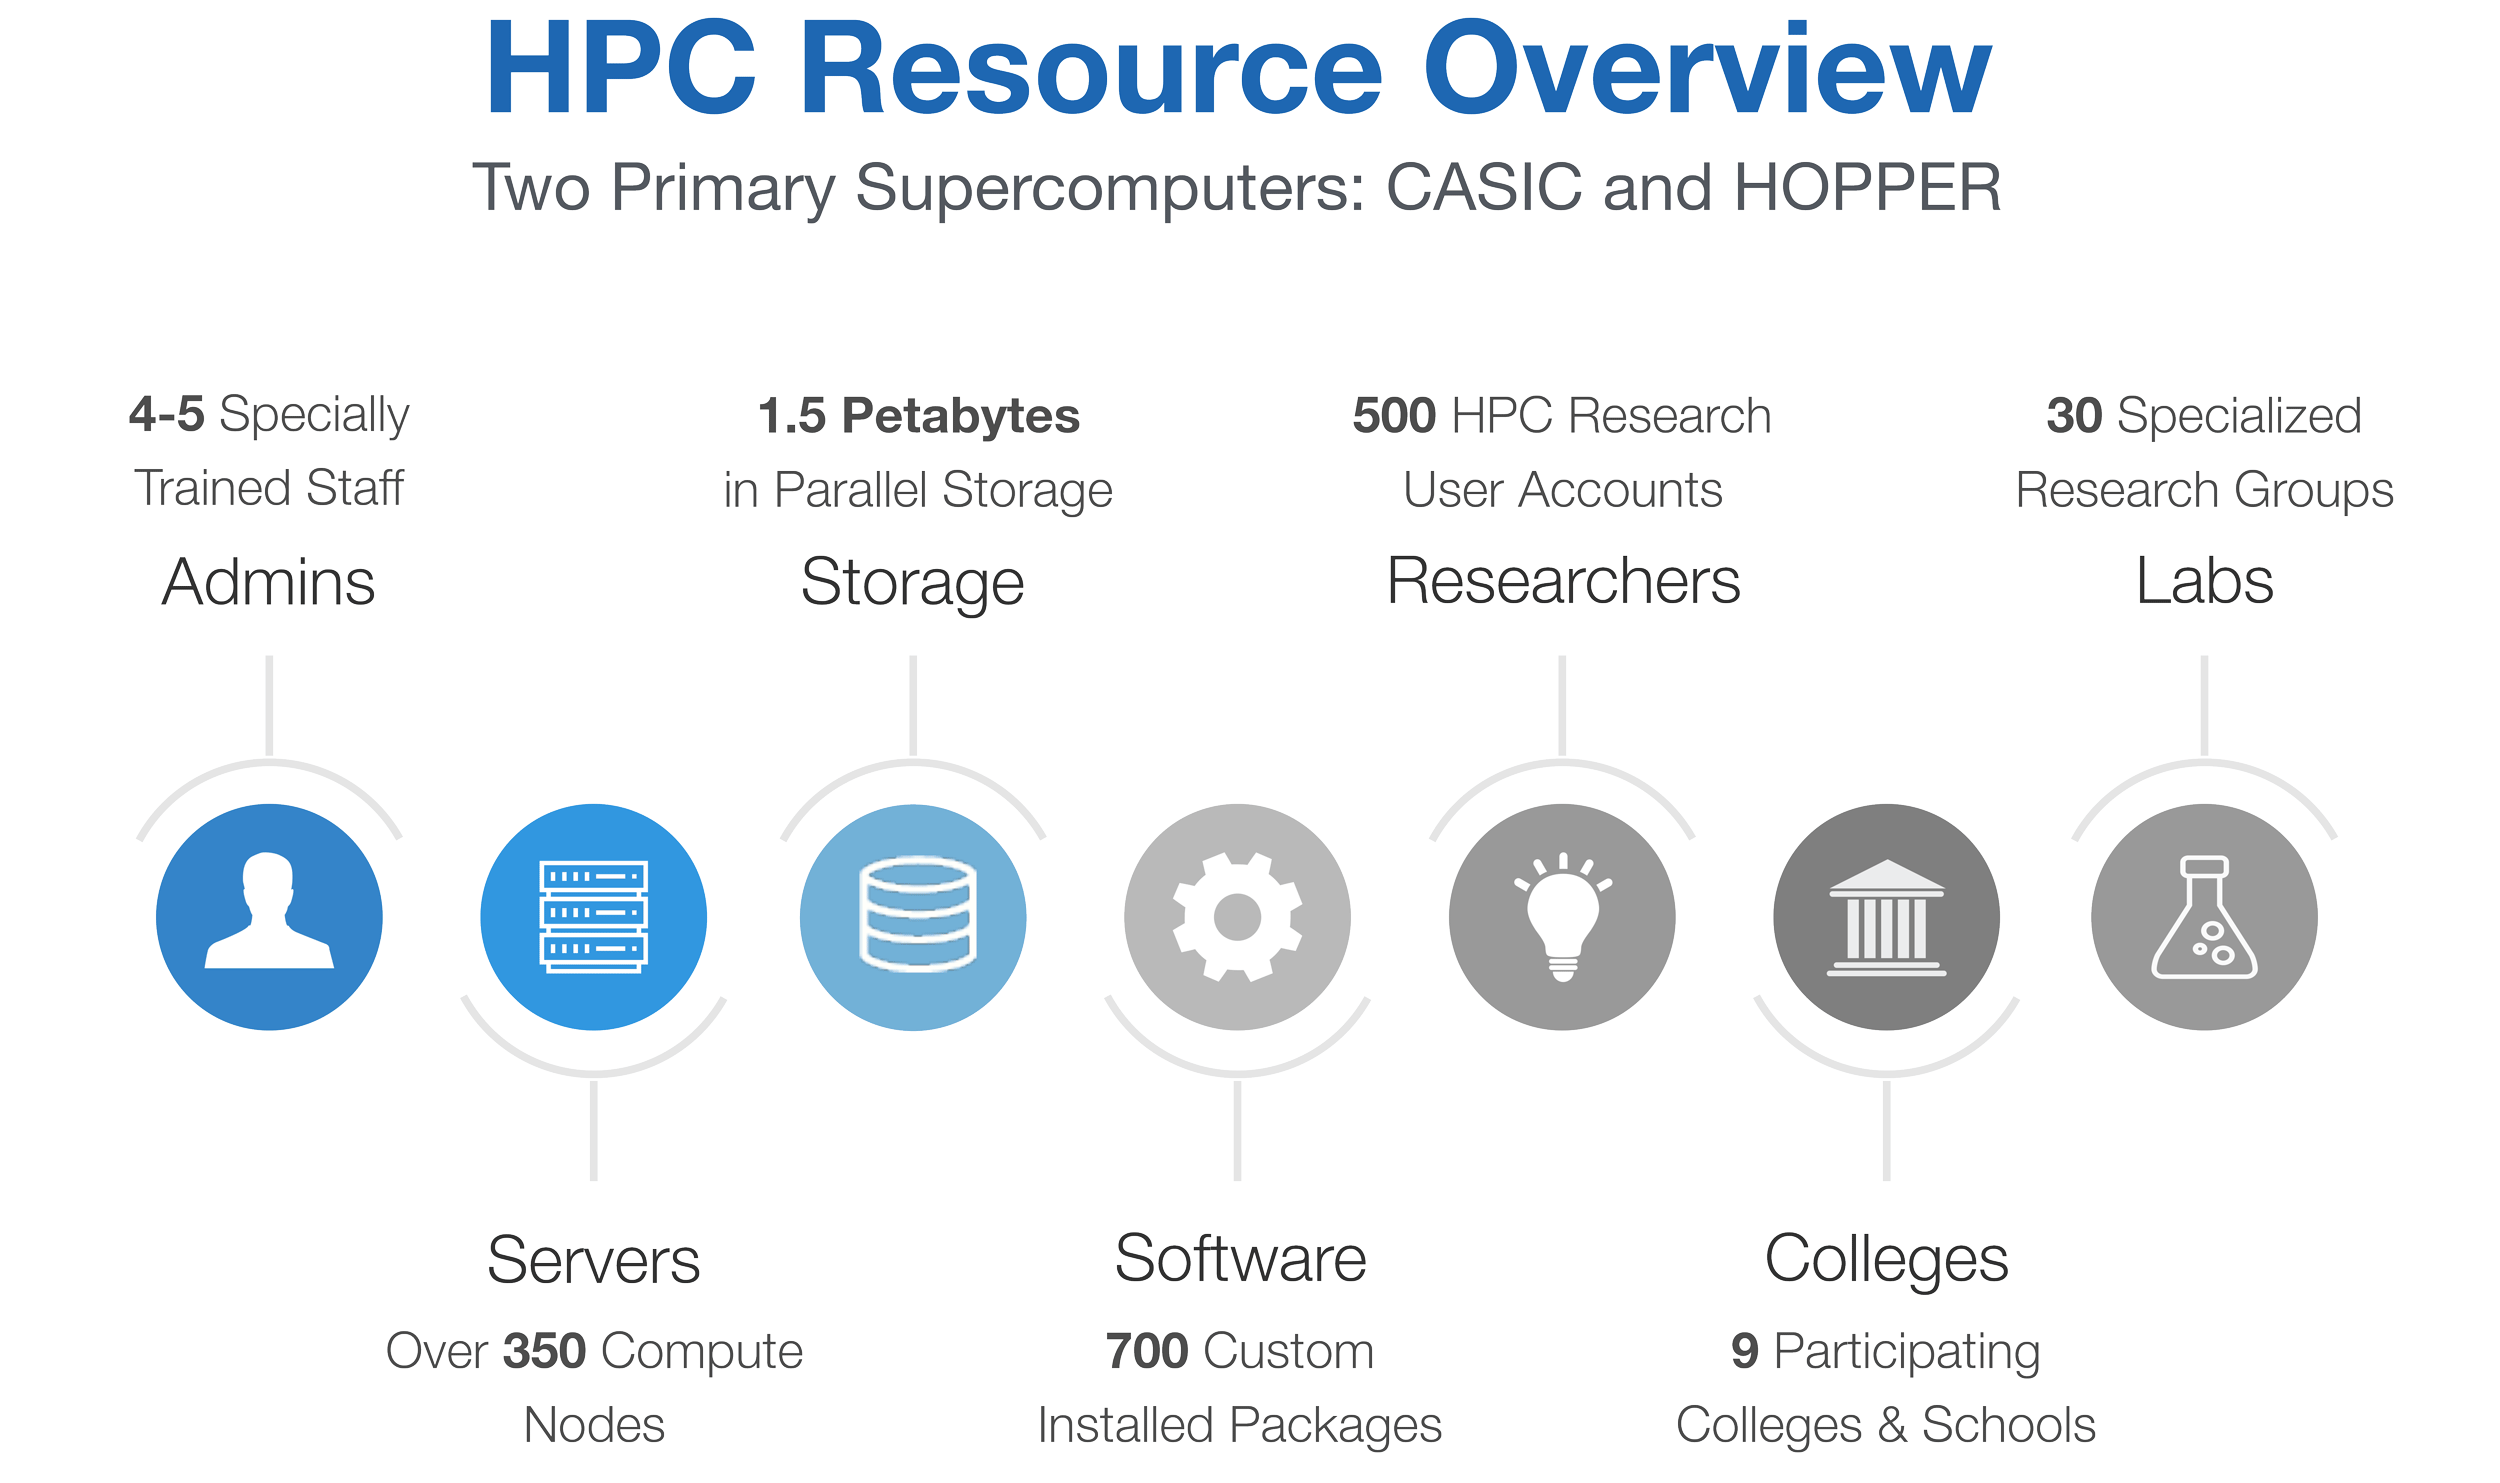 A graphic showing that there are 4-5 trained admins, 350 compute node, 1.5 petabytes of storage, 700 custom software programs, 500 research accounts, 9 participating colleges, and 30 specialized research groups using HPC.